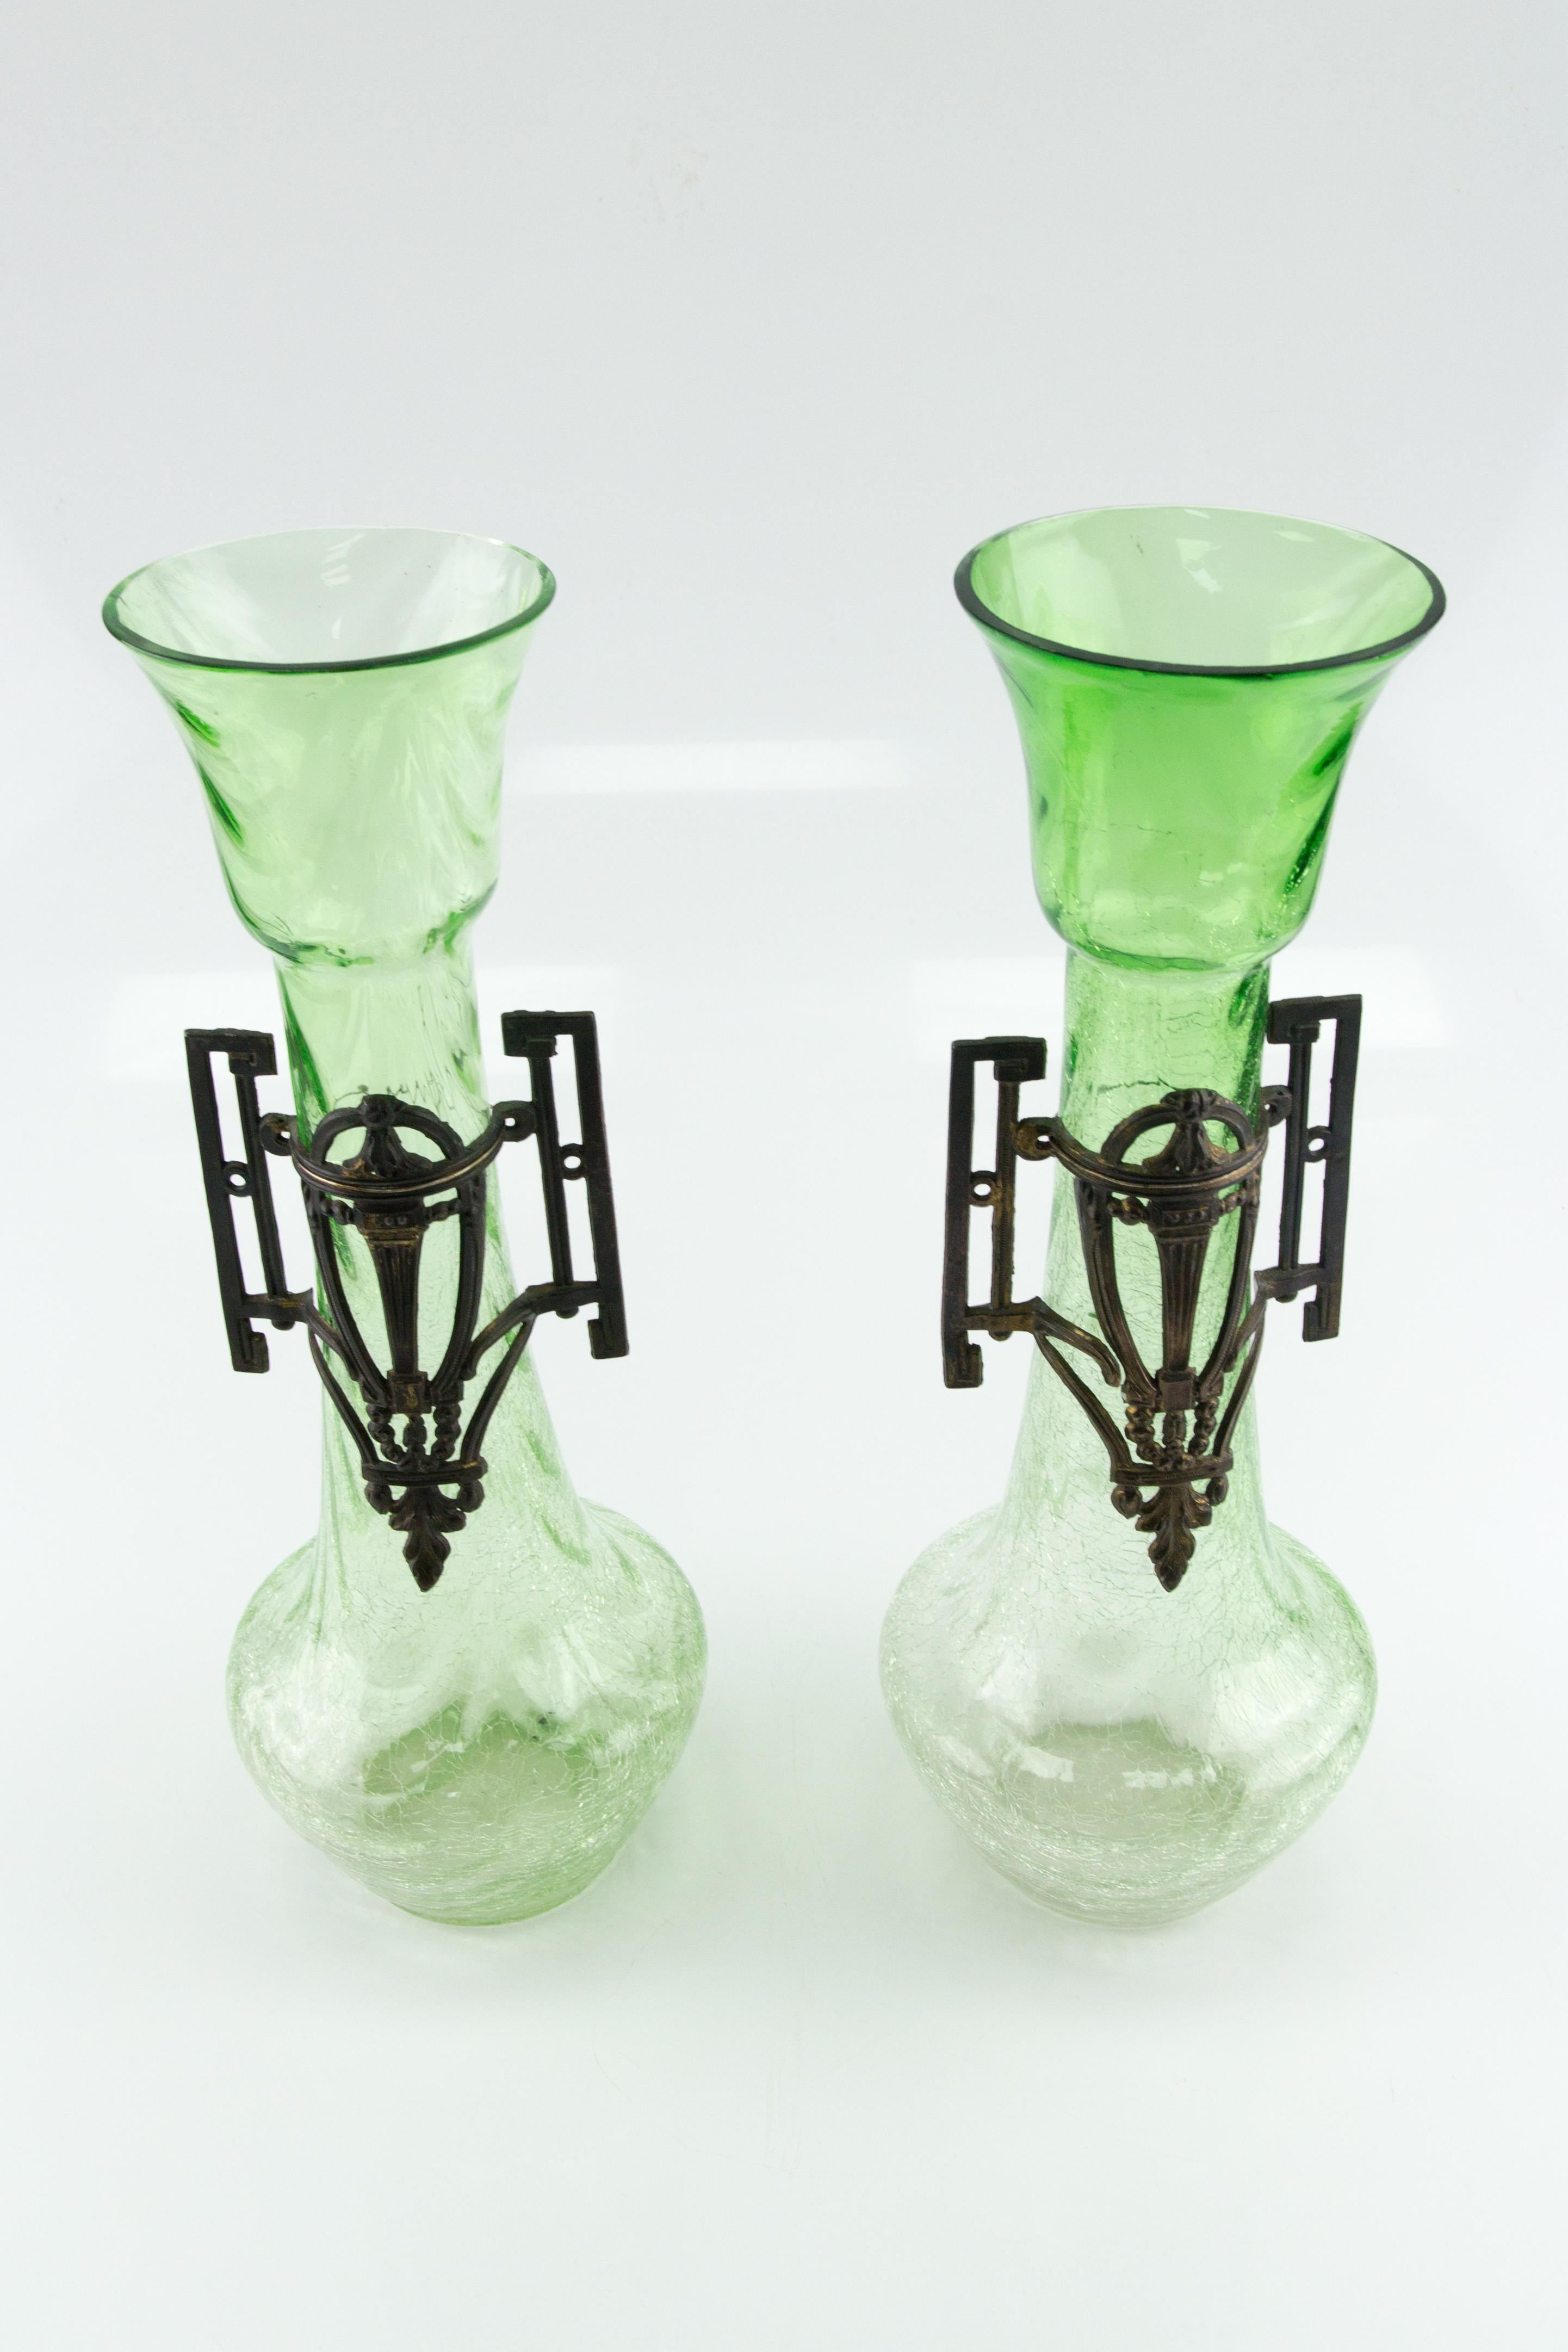 Pair of Large Art Nouveau Green Crackle Glass Vases, circa 1930s For Sale 6